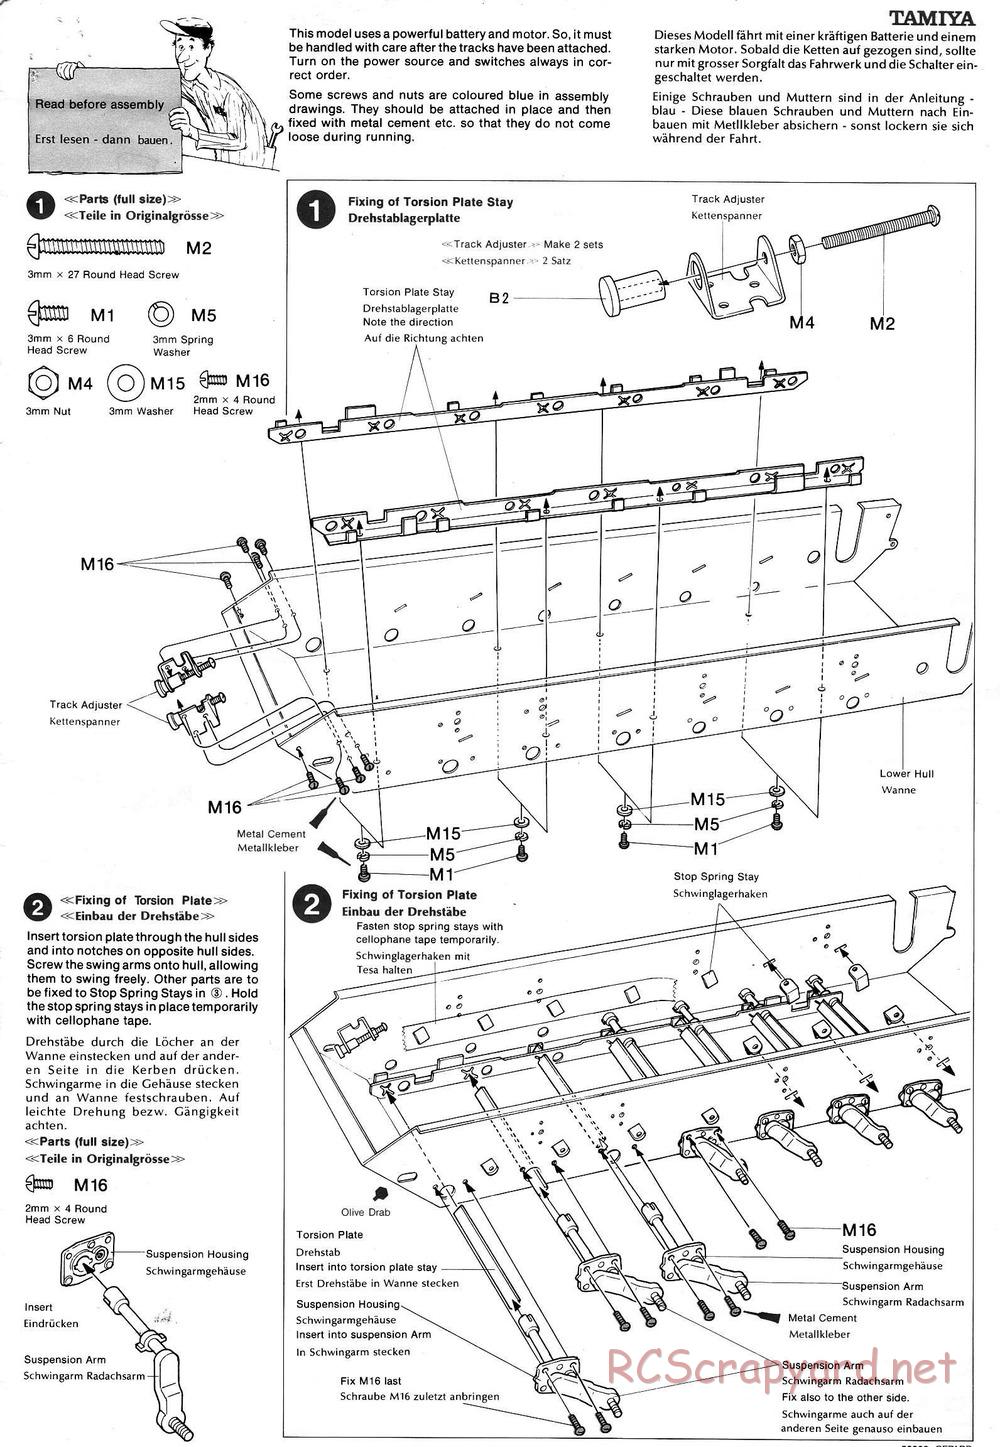 Tamiya - Flakpanzer Gepard - 1/16 Scale Chassis - Manual - Page 3